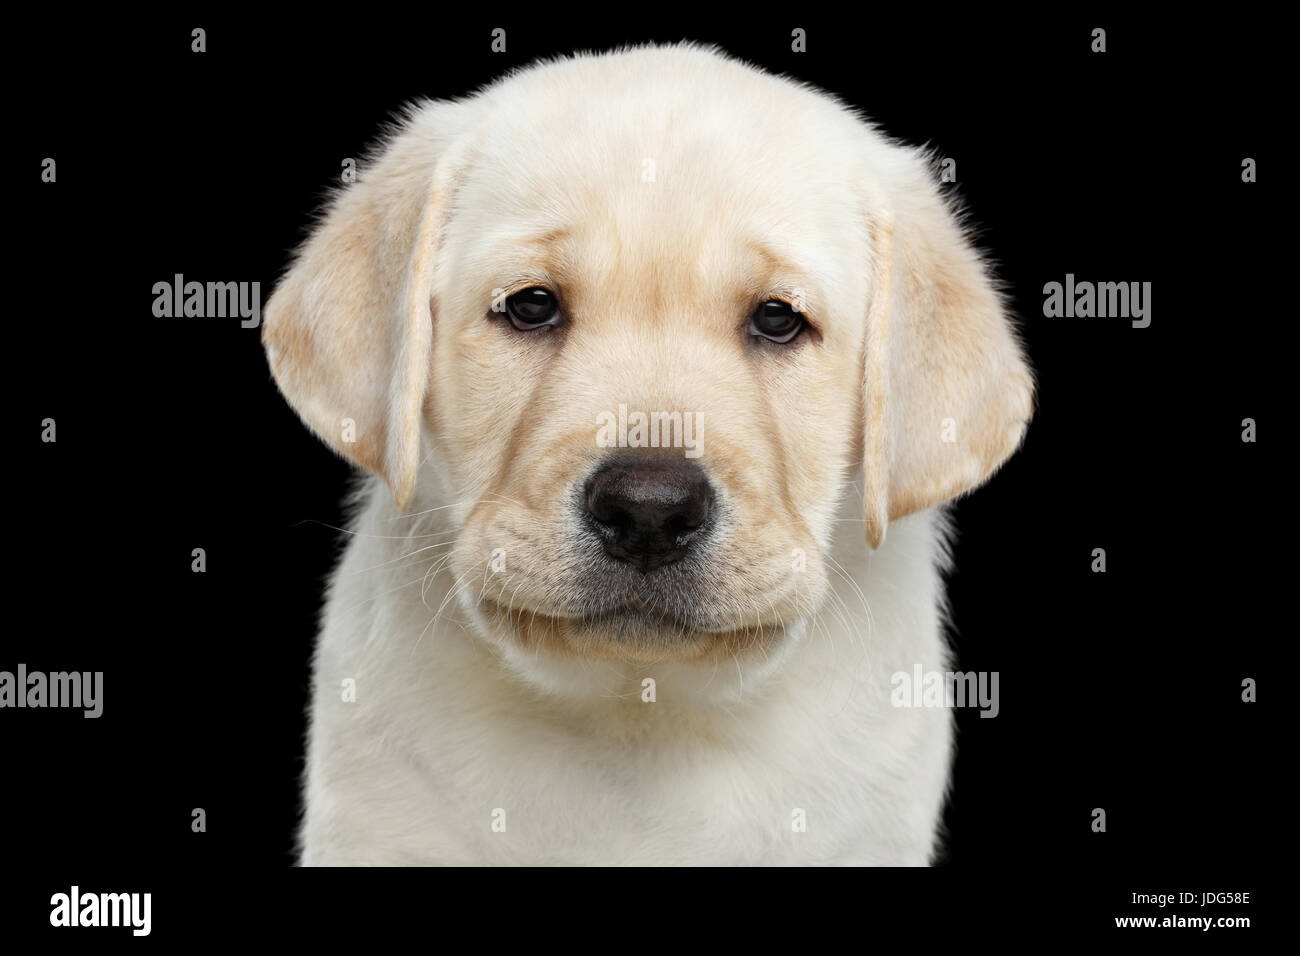 Labrador puppy isolated on Black background Stock Photo